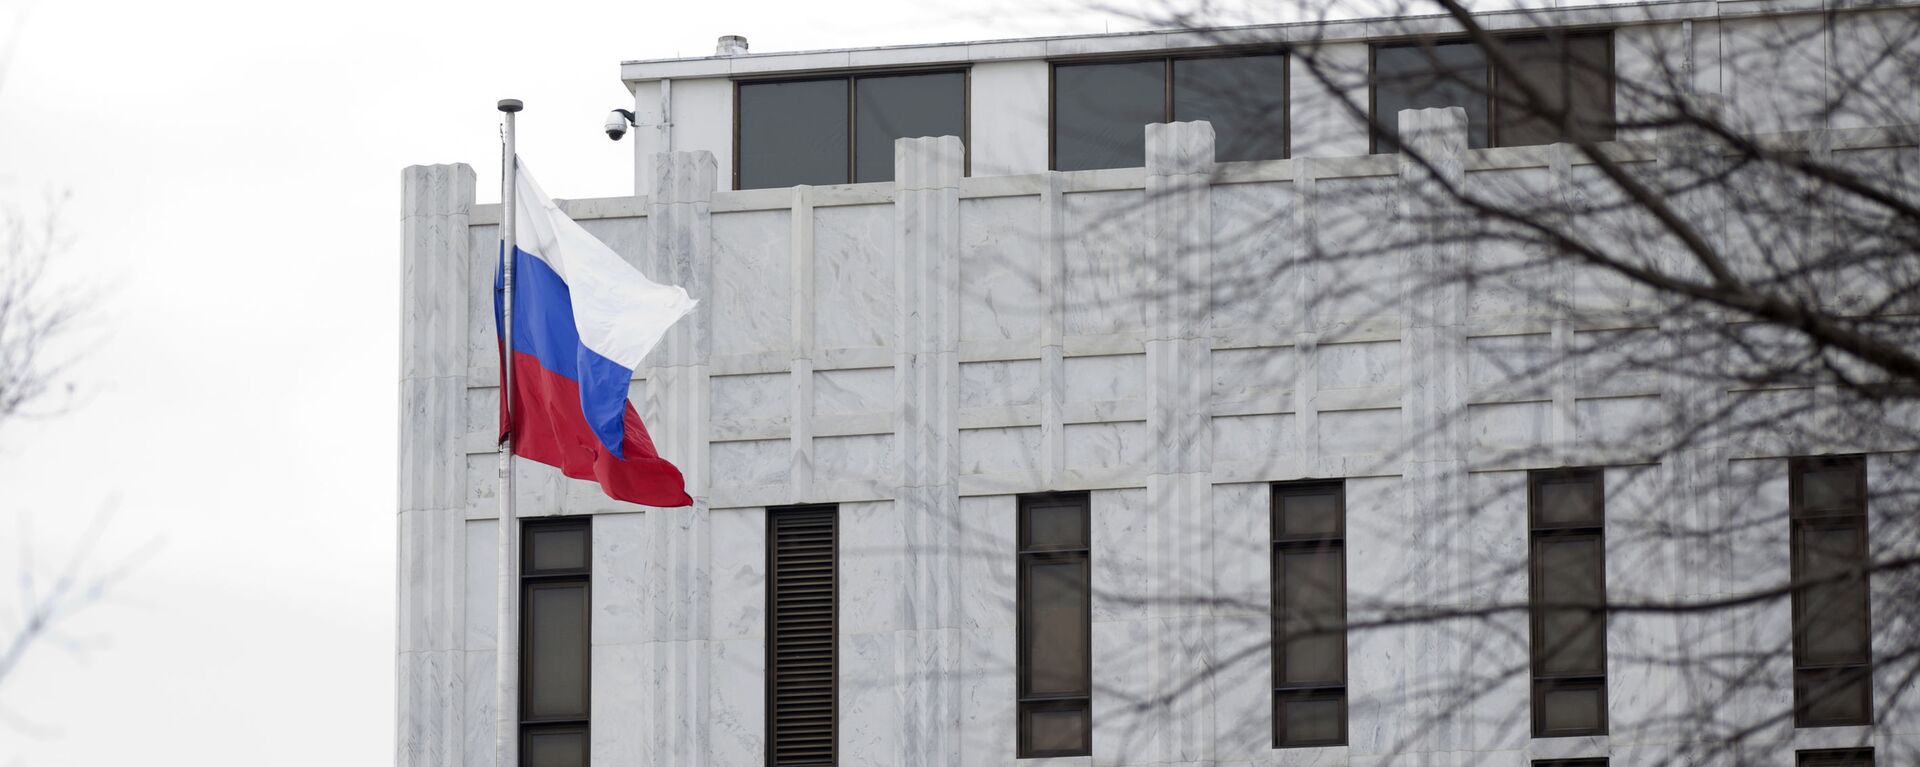 The Russian flag flies over the Russian embassy in Washington, Saturday, March 1, 2014 - Sputnik International, 1920, 05.10.2021